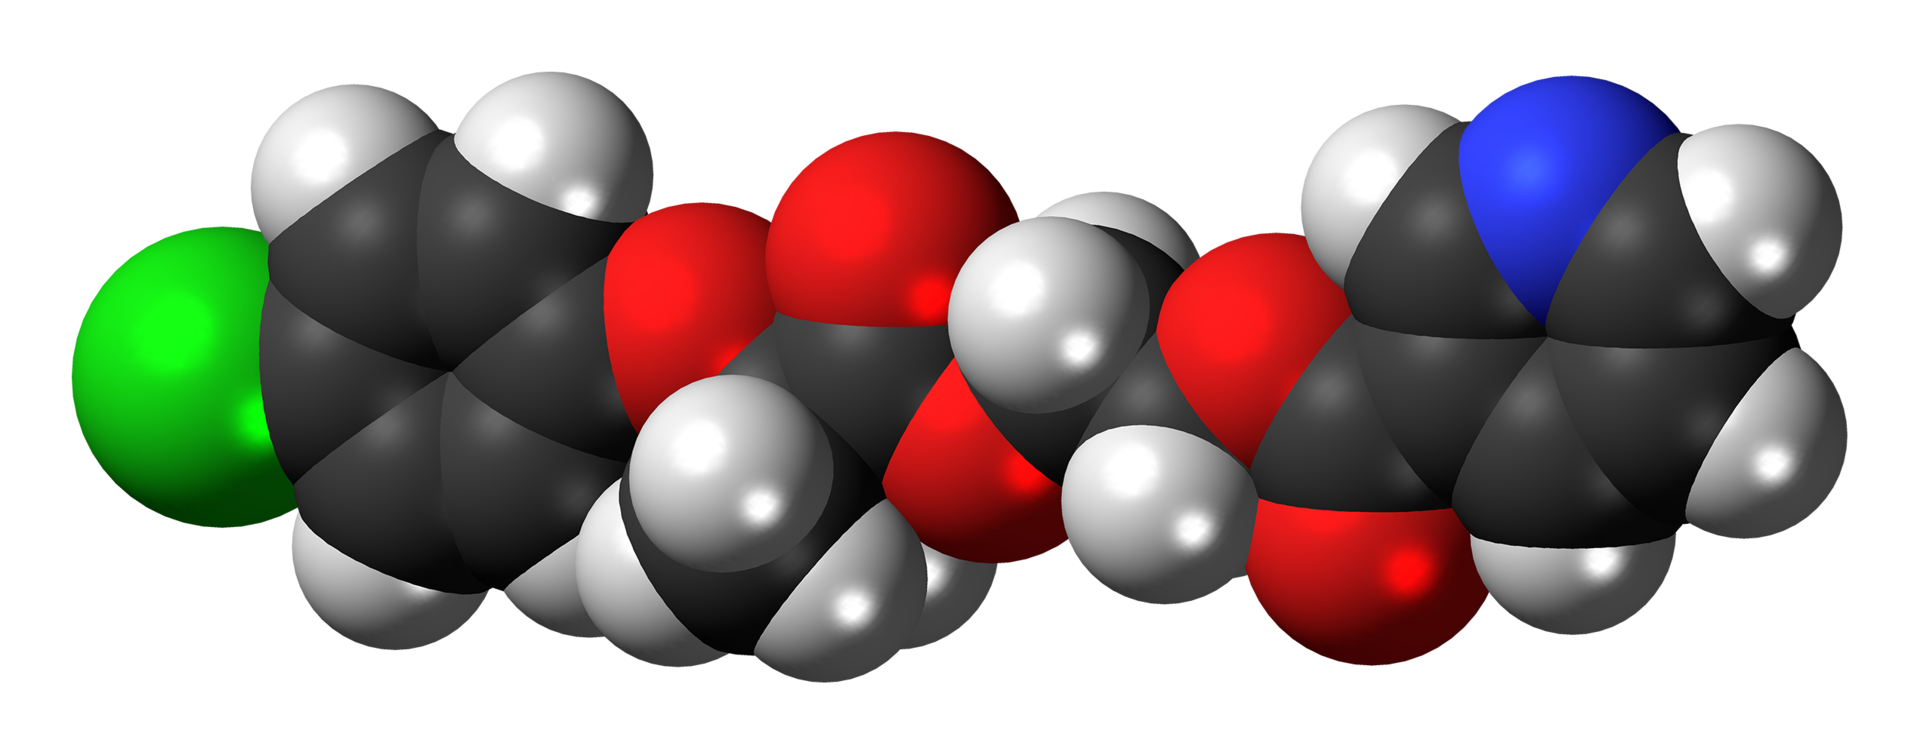 Space-filling model of the etofibrate molecule